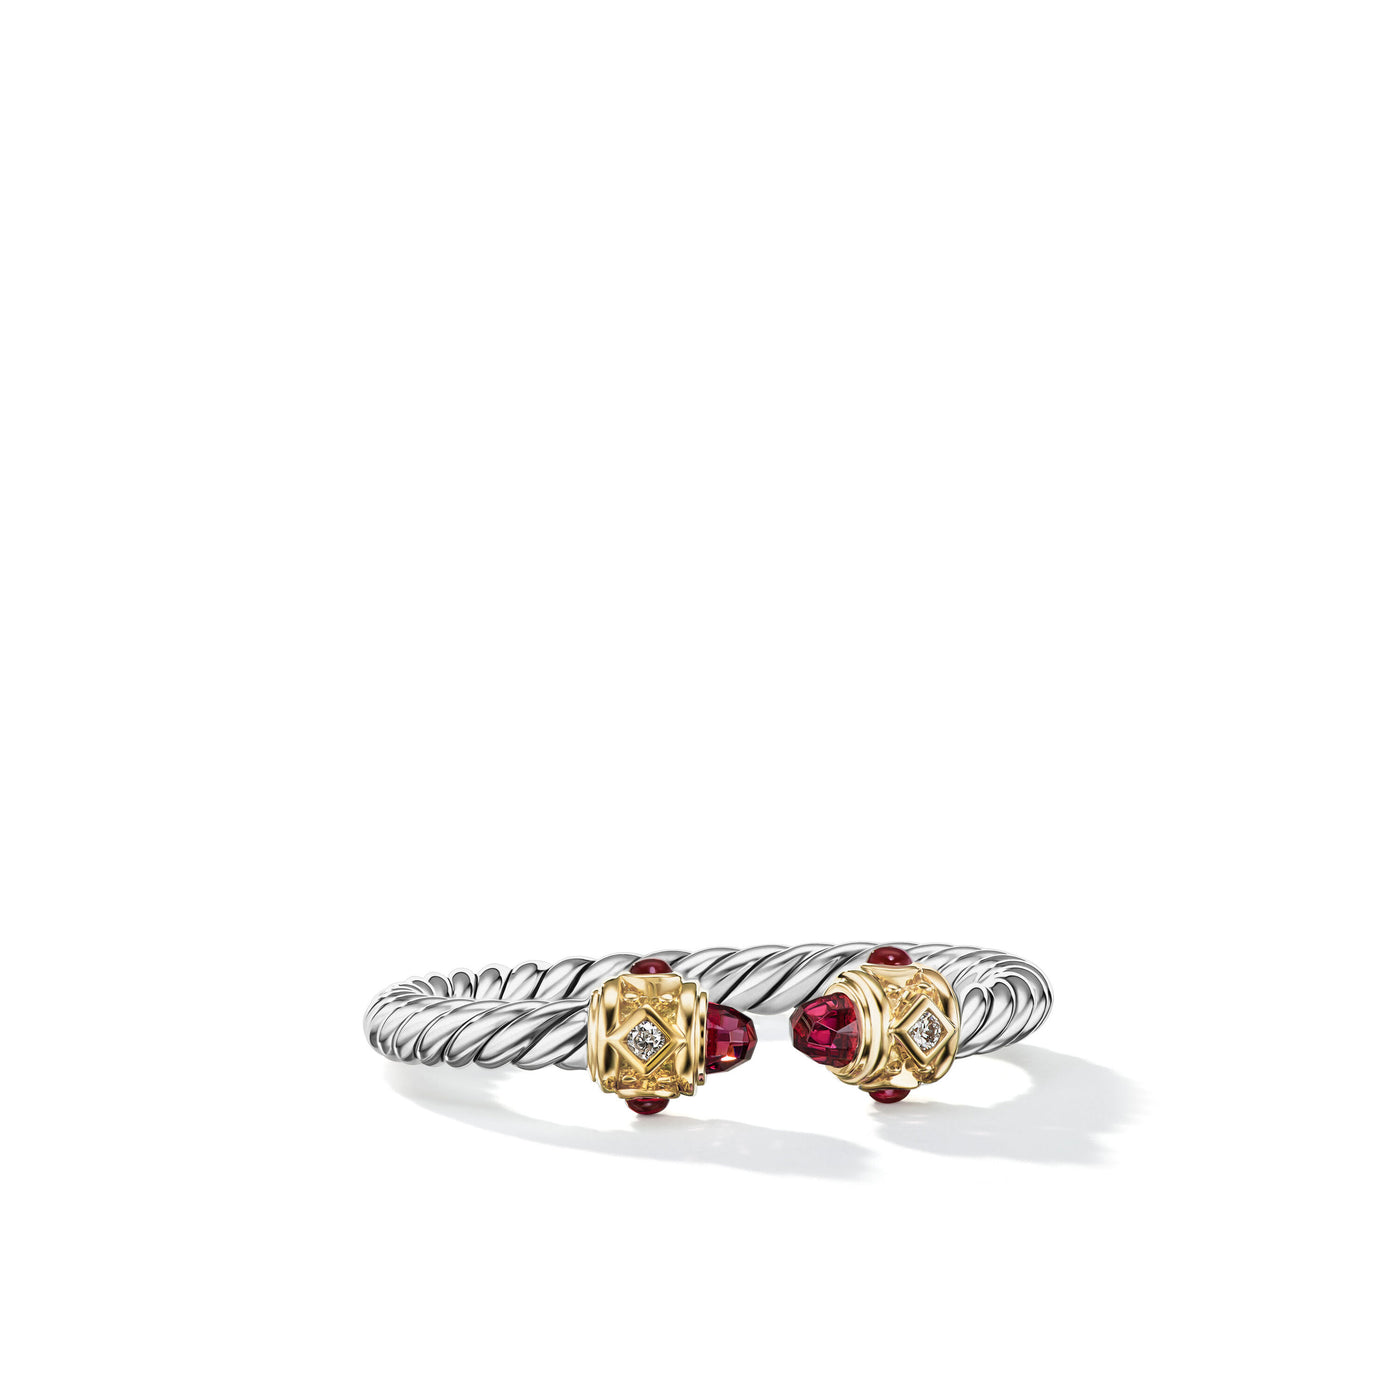 Renaissance Ring in Sterling Silver with 14K Yellow Gold\, Rhodolite Garnet and Diamonds\, 2.3mm